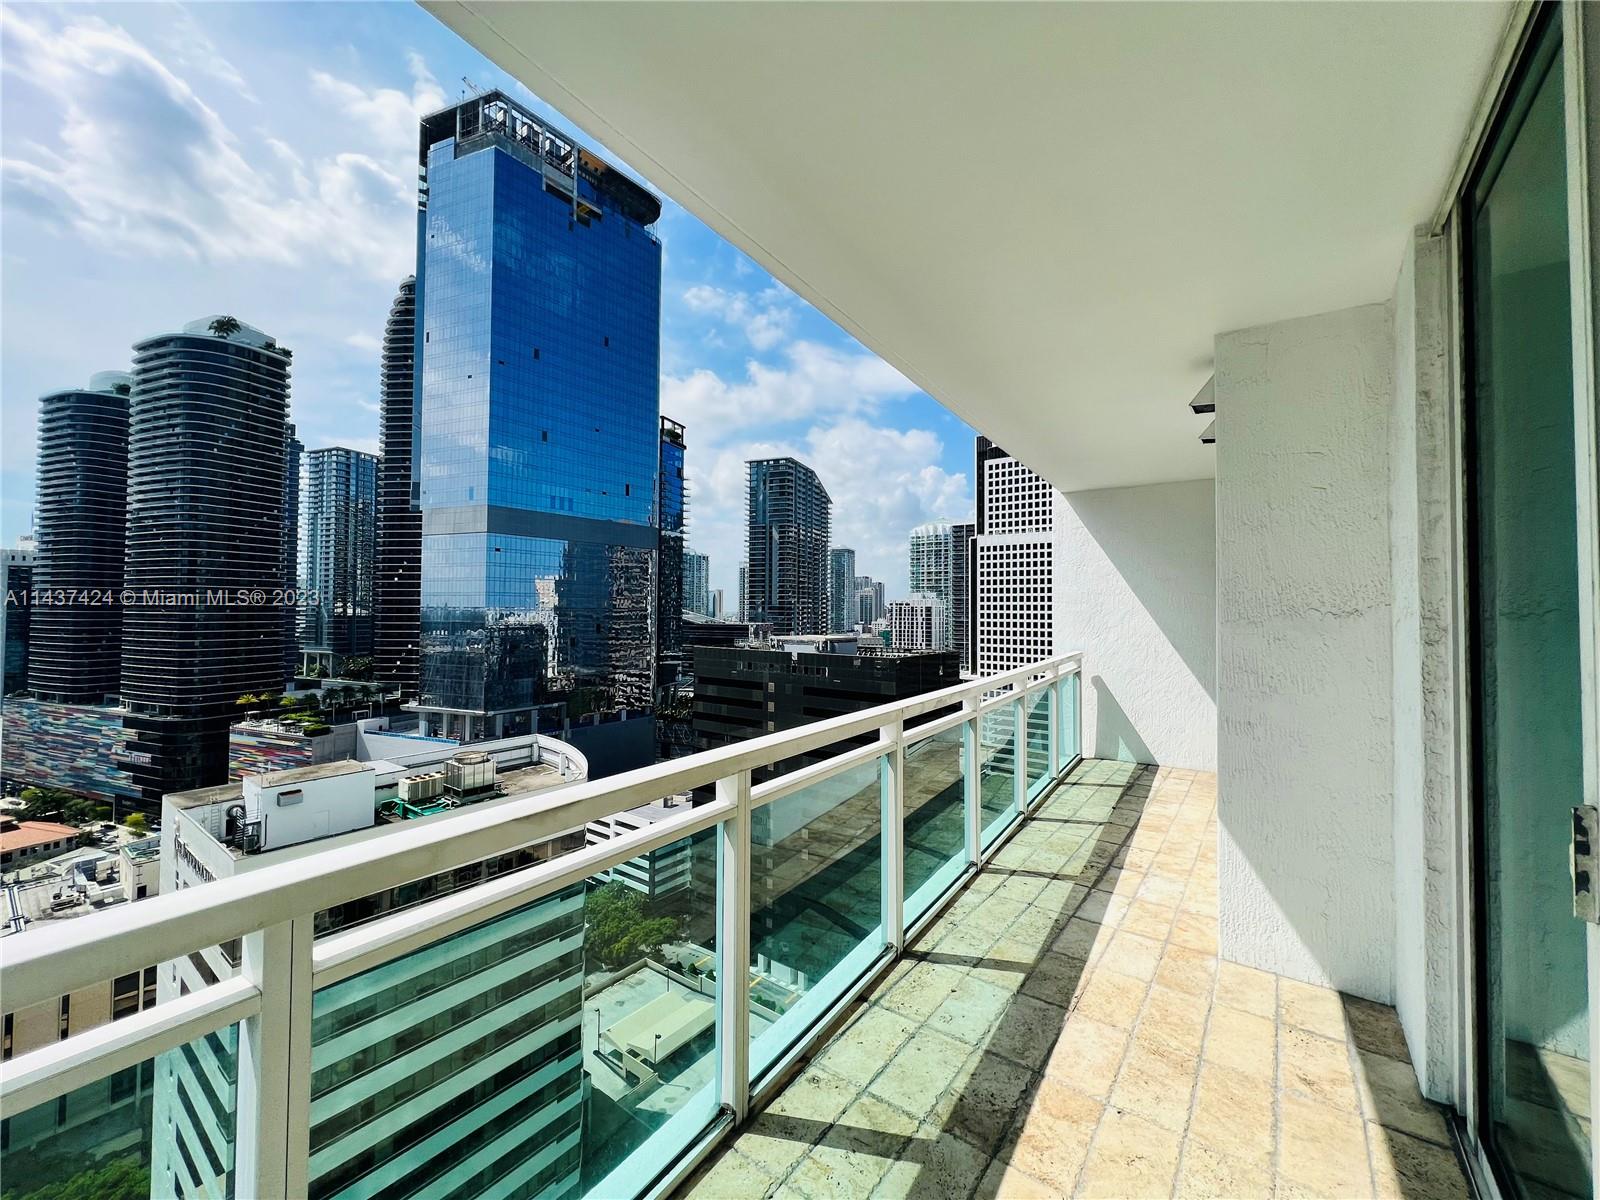 The Plaza on Brickell South image #17